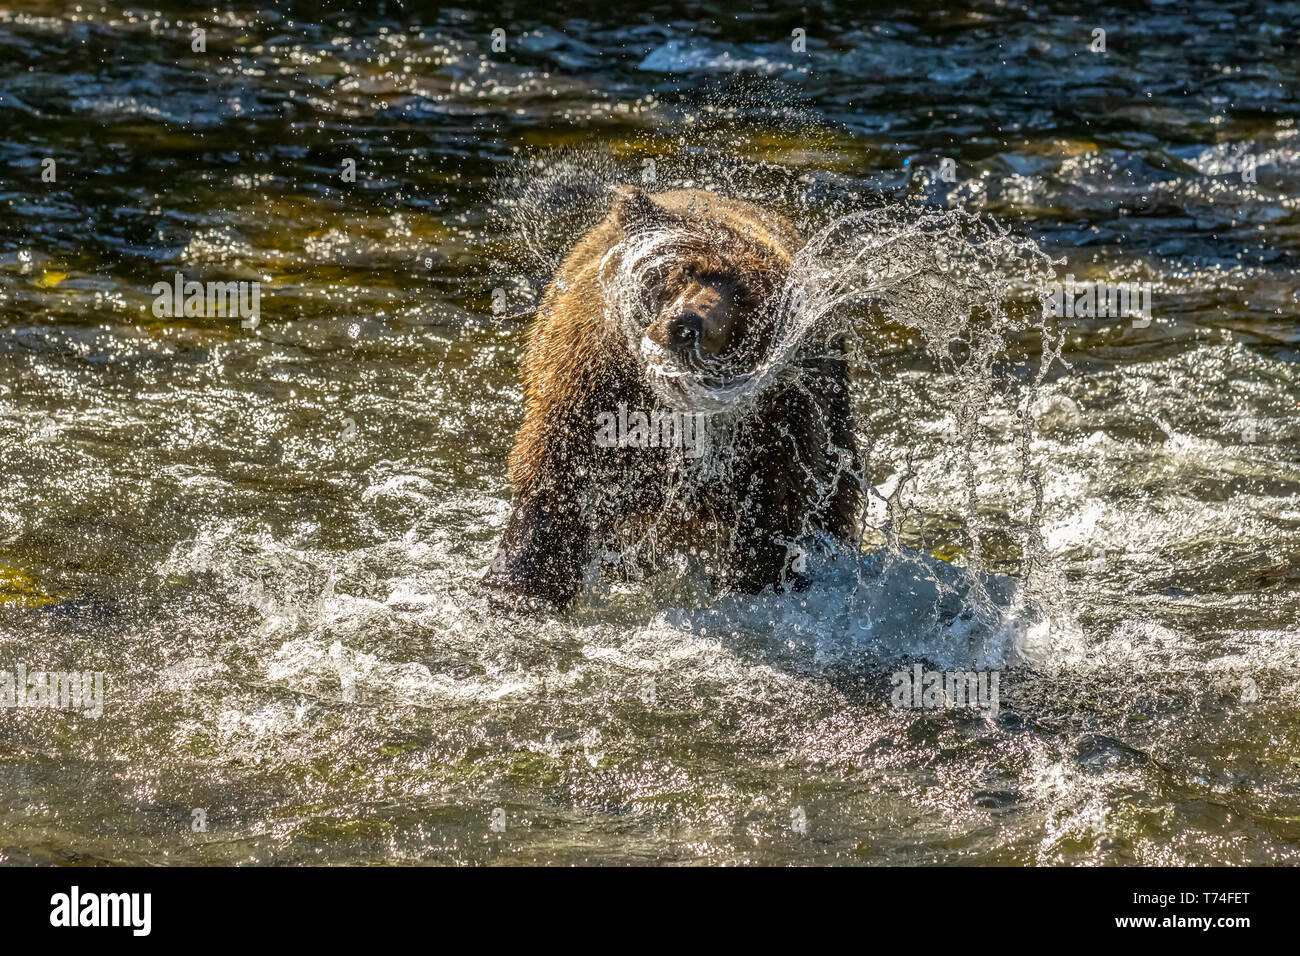 A Brown bear (Ursus arctos) shakes off water after chasing salmon during the summer salmon run in the Russian River near Cooper Landing, South-cent... Stock Photo